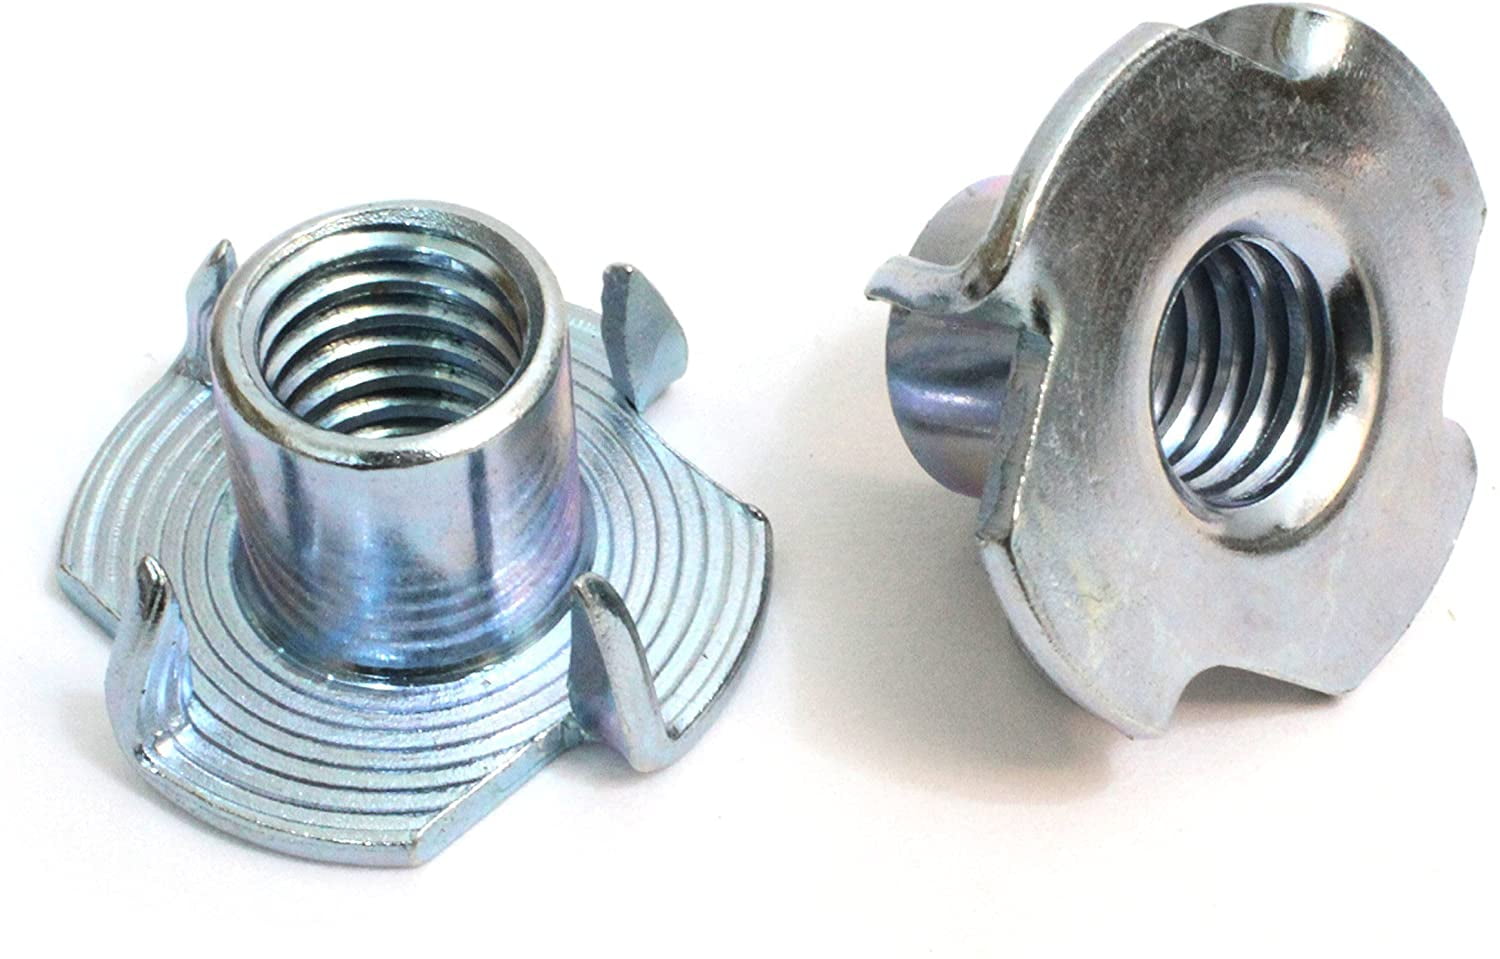 T-Nut - Tee Nut Latest Price, Manufacturers & Suppliers